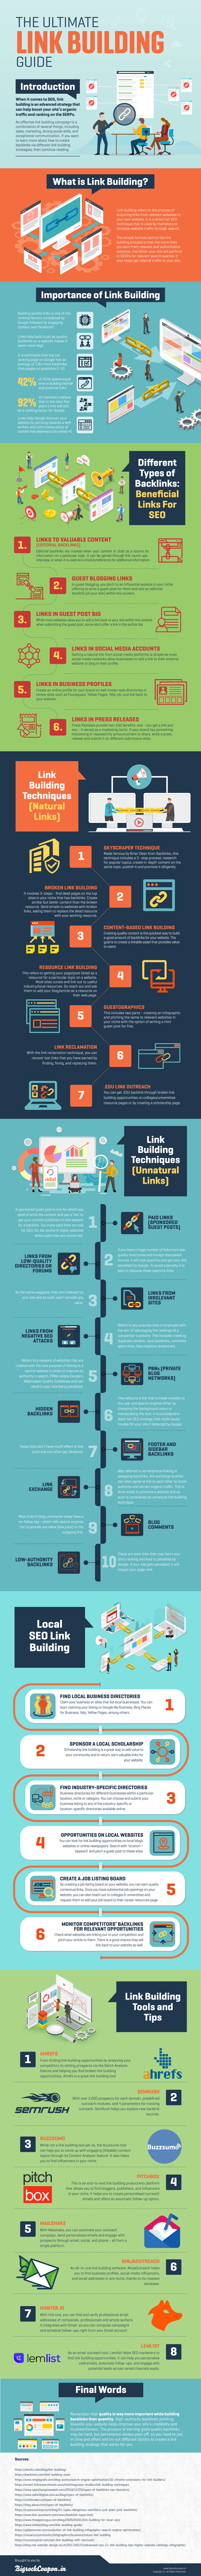 Link Building Guide Infographic